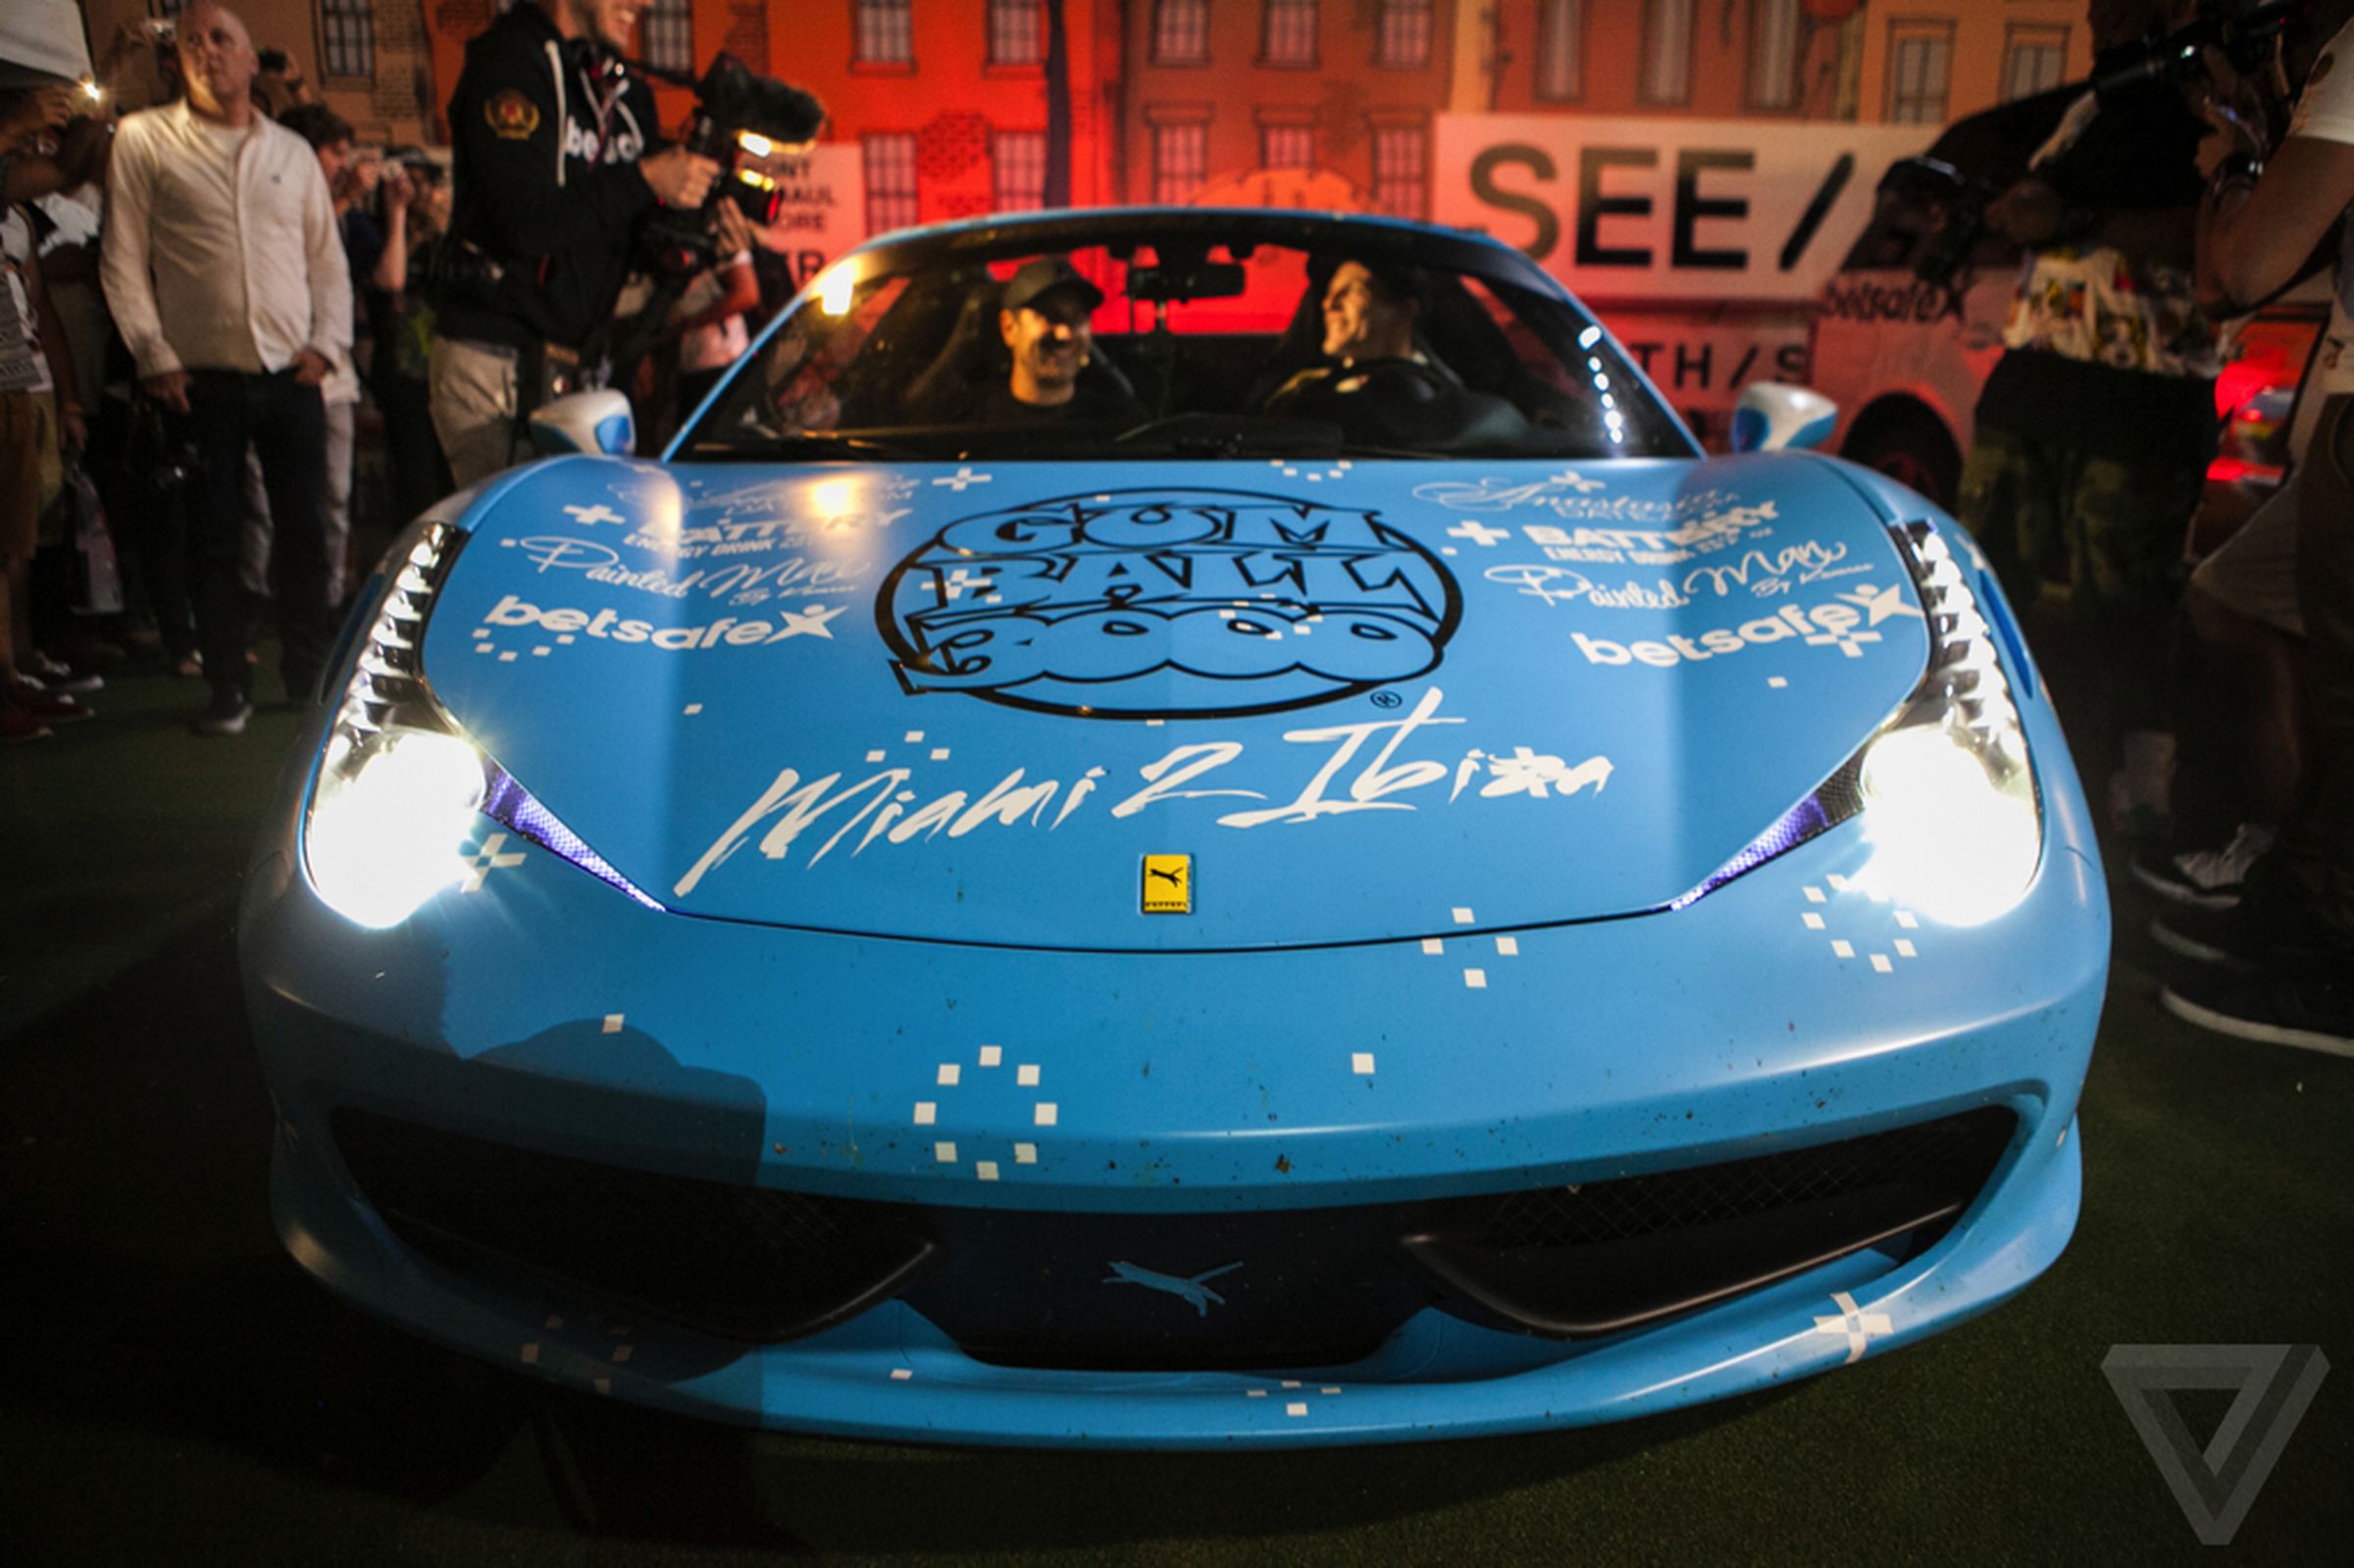 Photos from the Gumball 3000 road rally in New York City